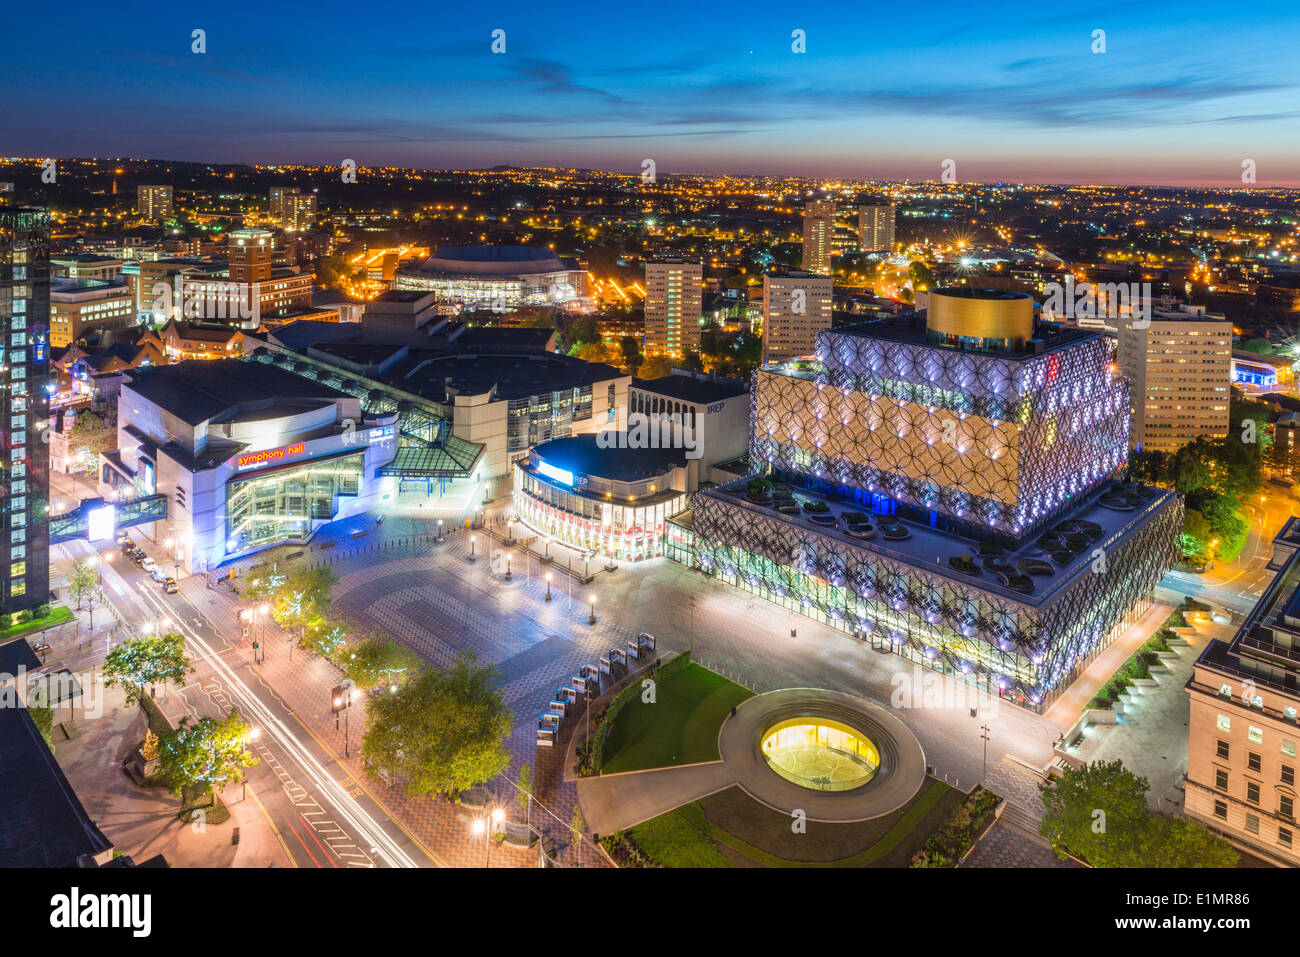 A night view of Birmingham city centre at night, showing Centenary Square and the new library of Birmingham. Stock Photo